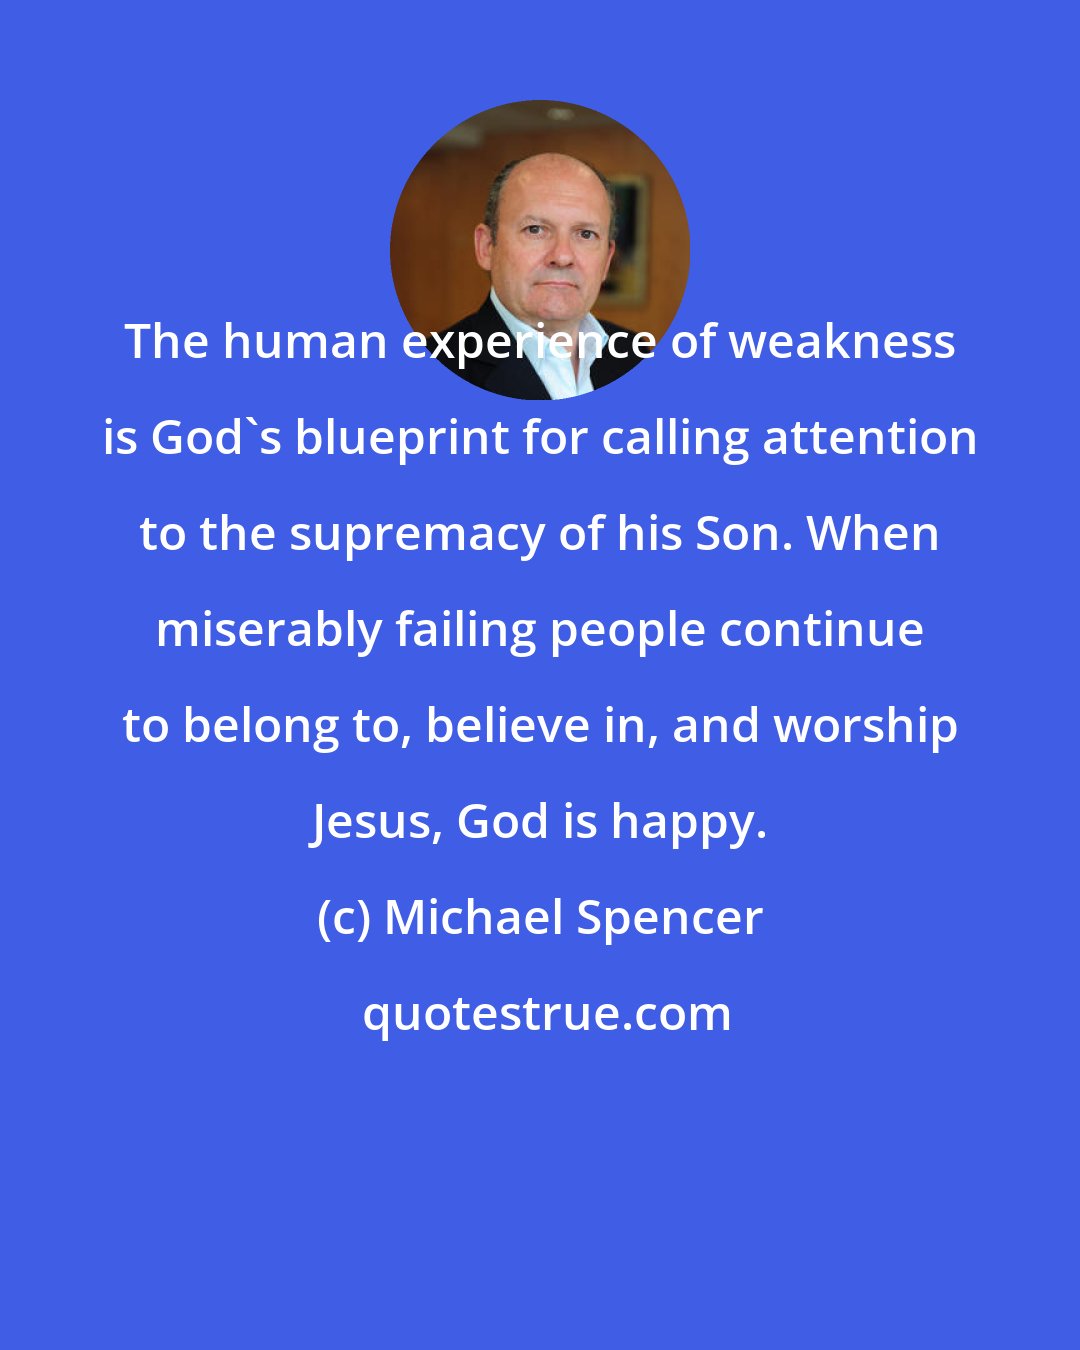 Michael Spencer: The human experience of weakness is God's blueprint for calling attention to the supremacy of his Son. When miserably failing people continue to belong to, believe in, and worship Jesus, God is happy.